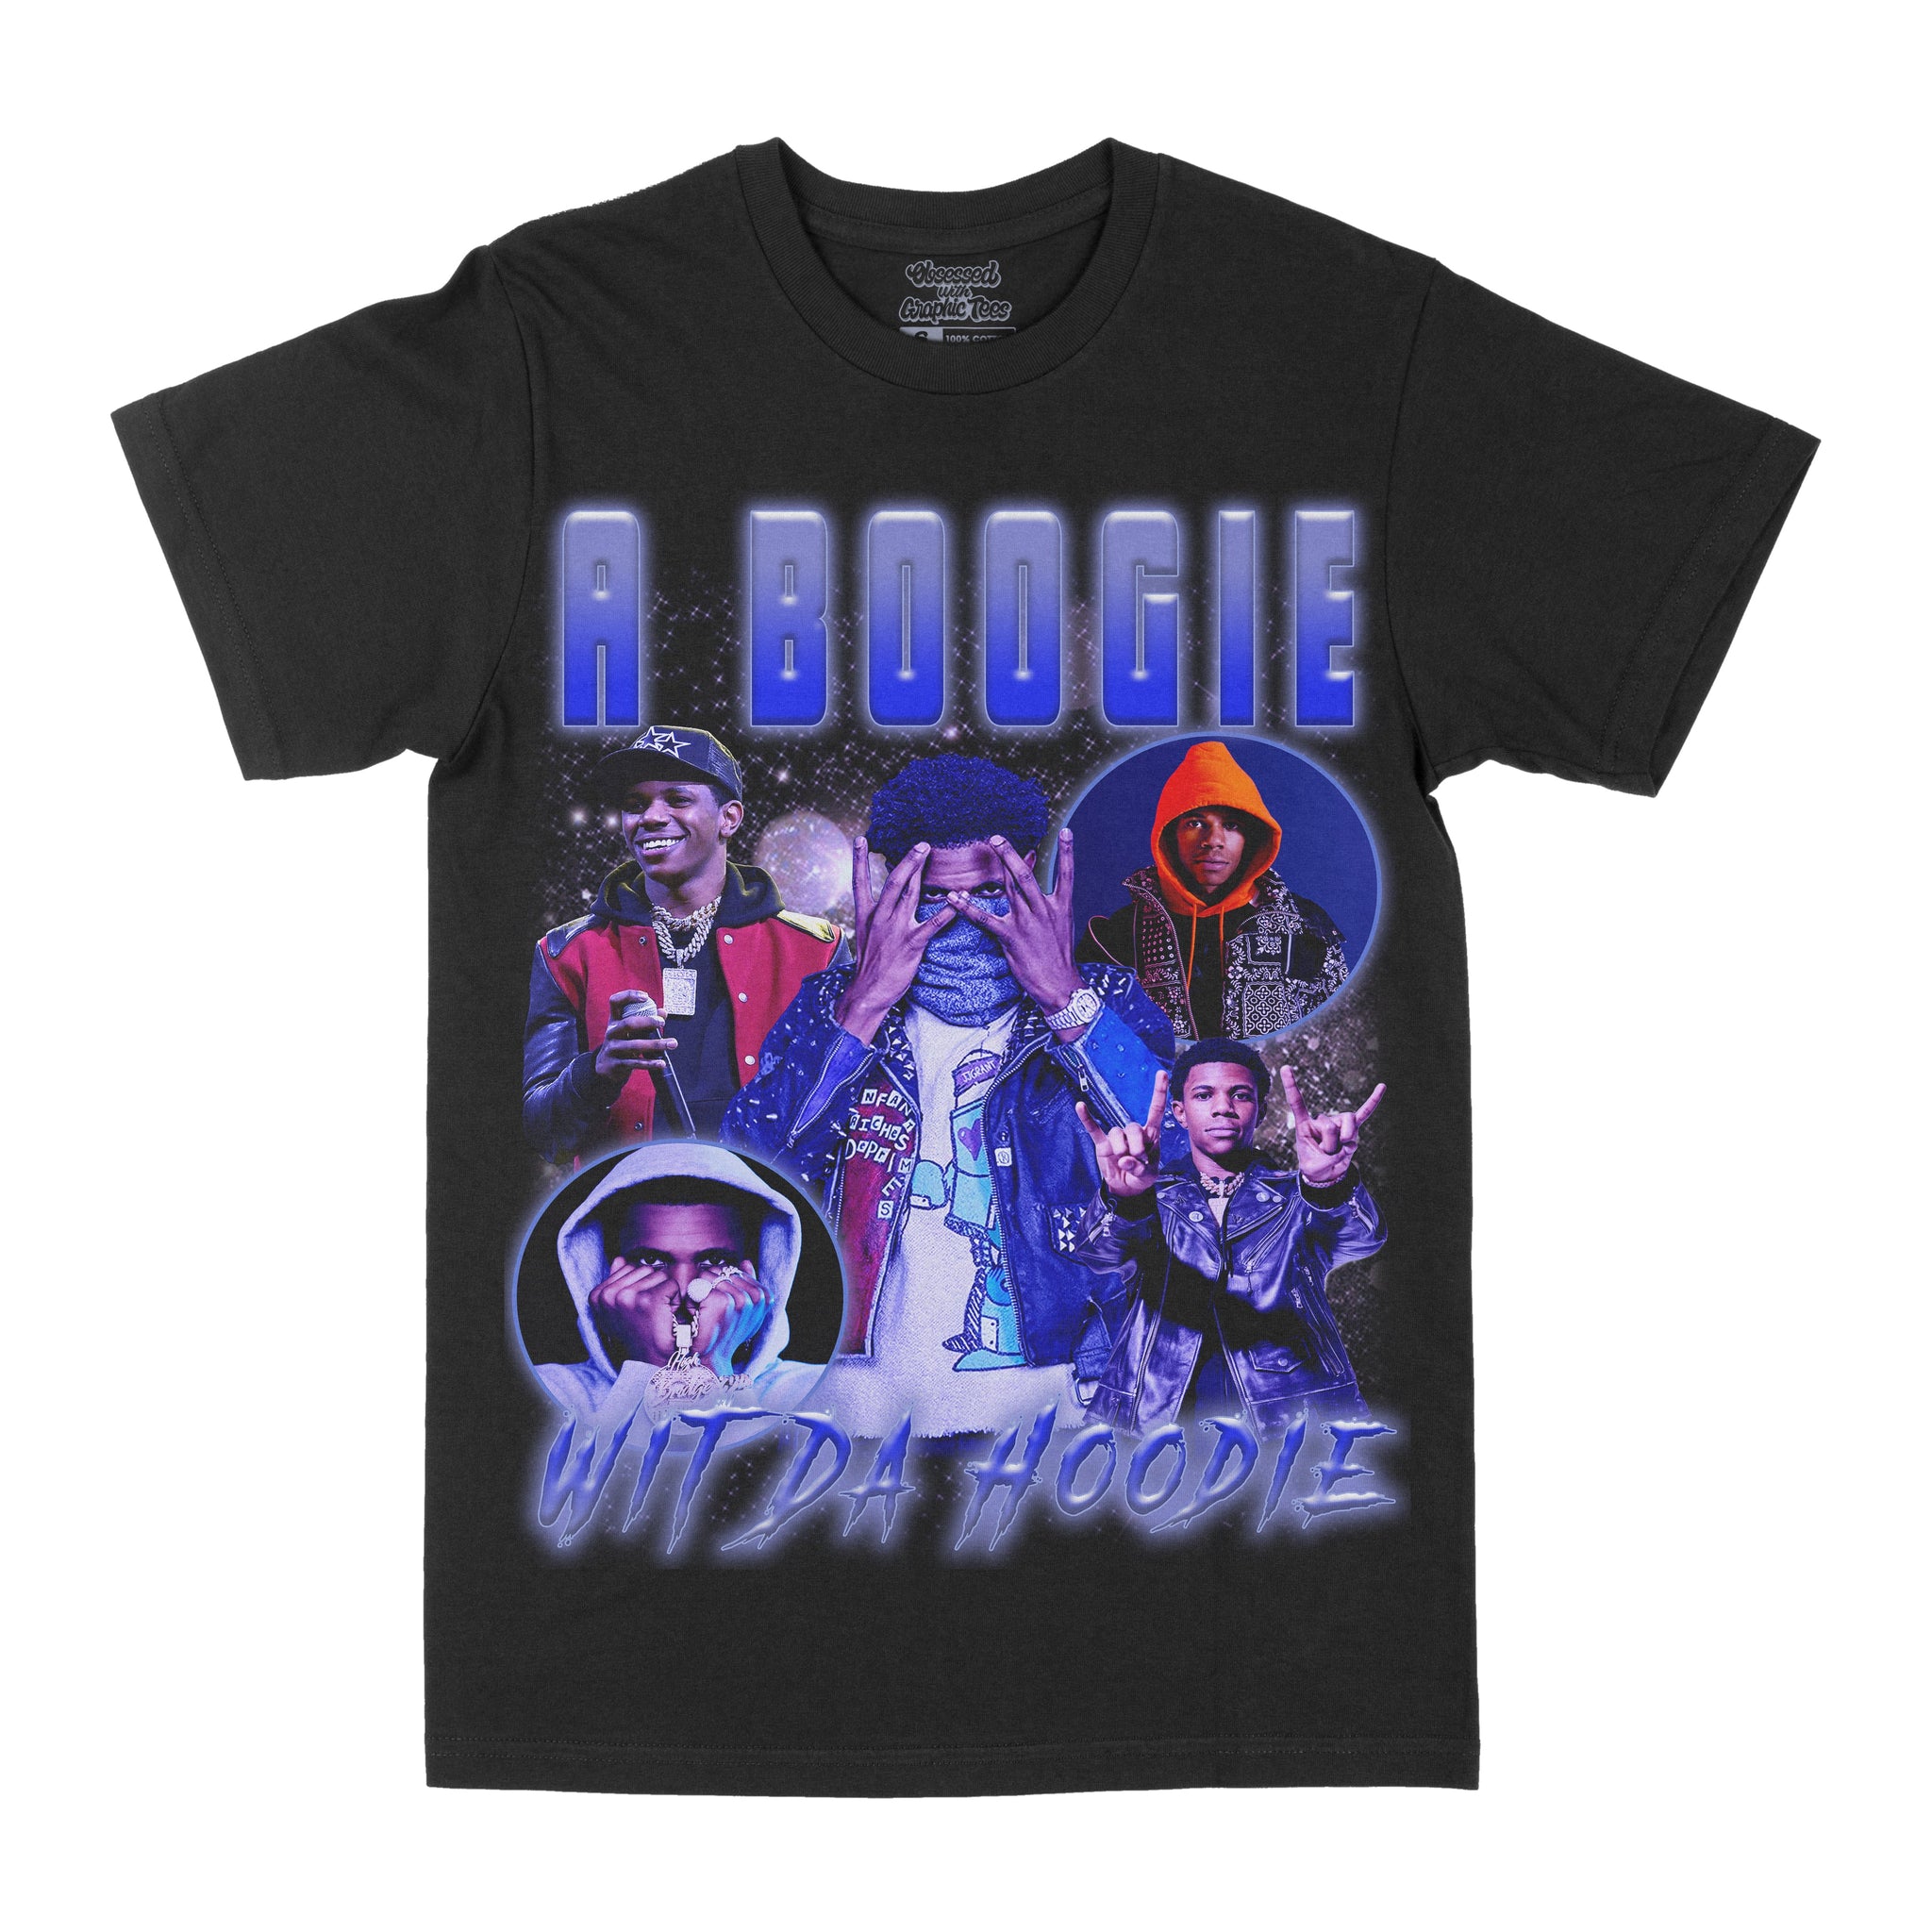 A Boogie Graphic Tee